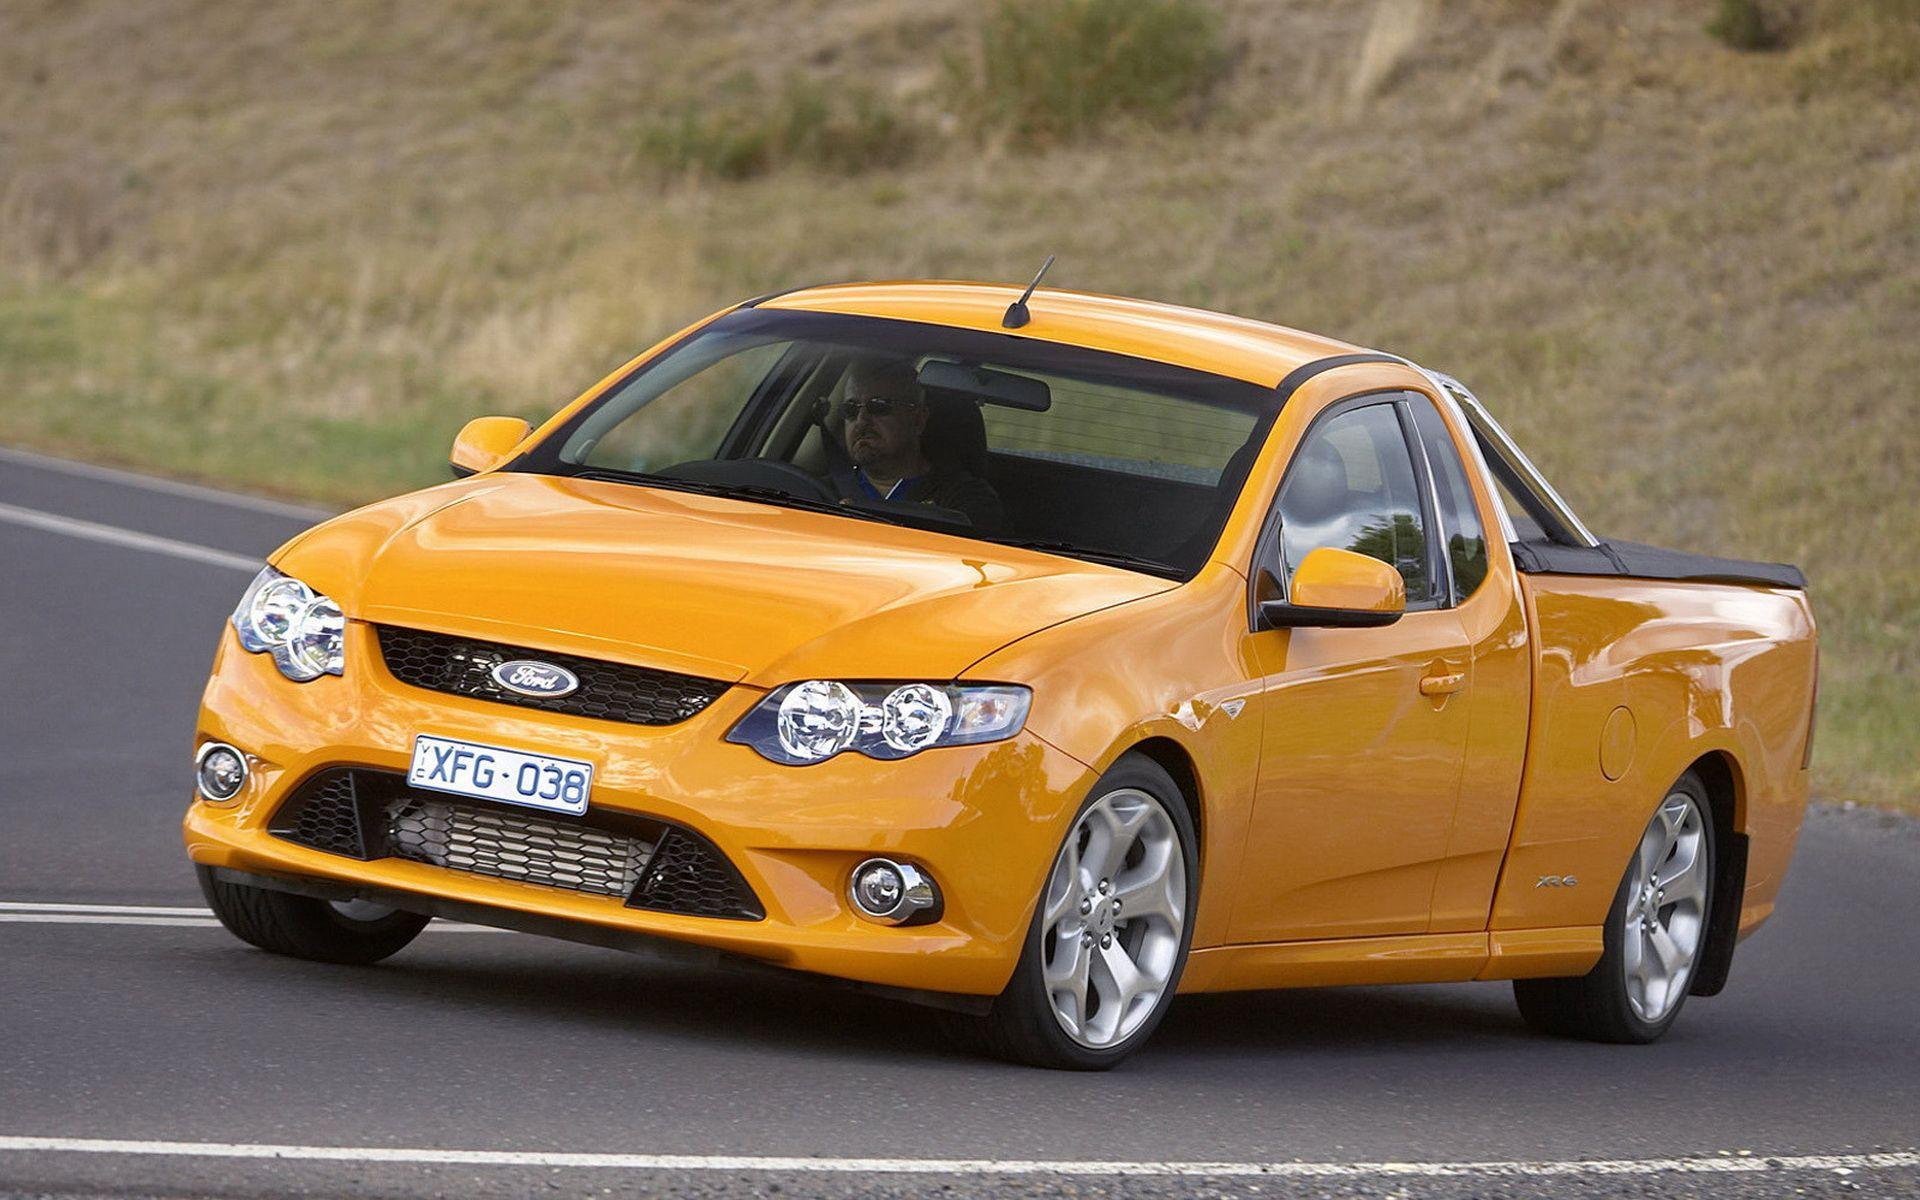 Ford Falcon XR6 Turbo wallpaper and image, picture